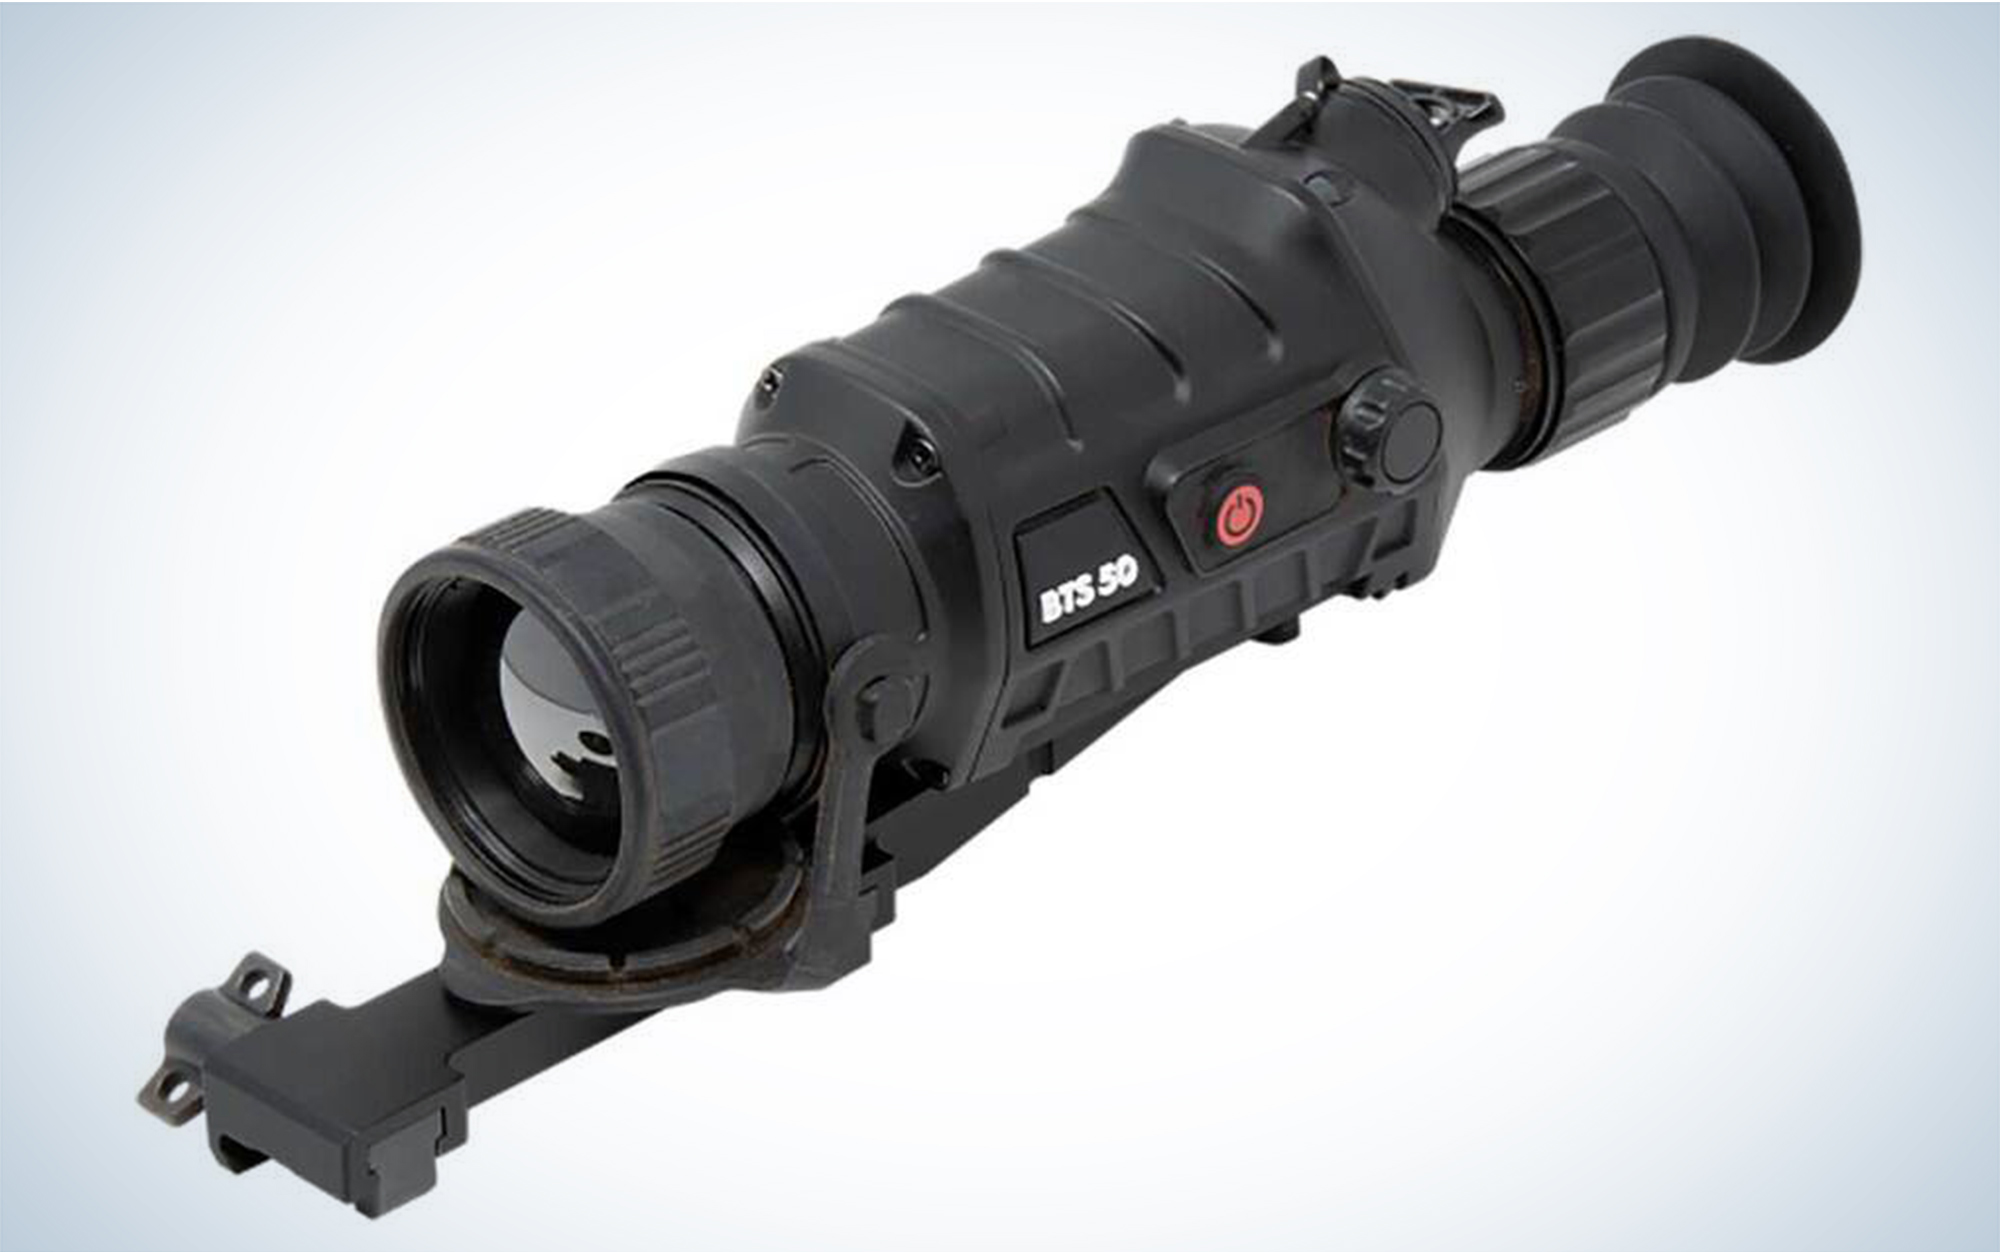 The Burris BTS50 Thermal Riflescope is the best for ARs.